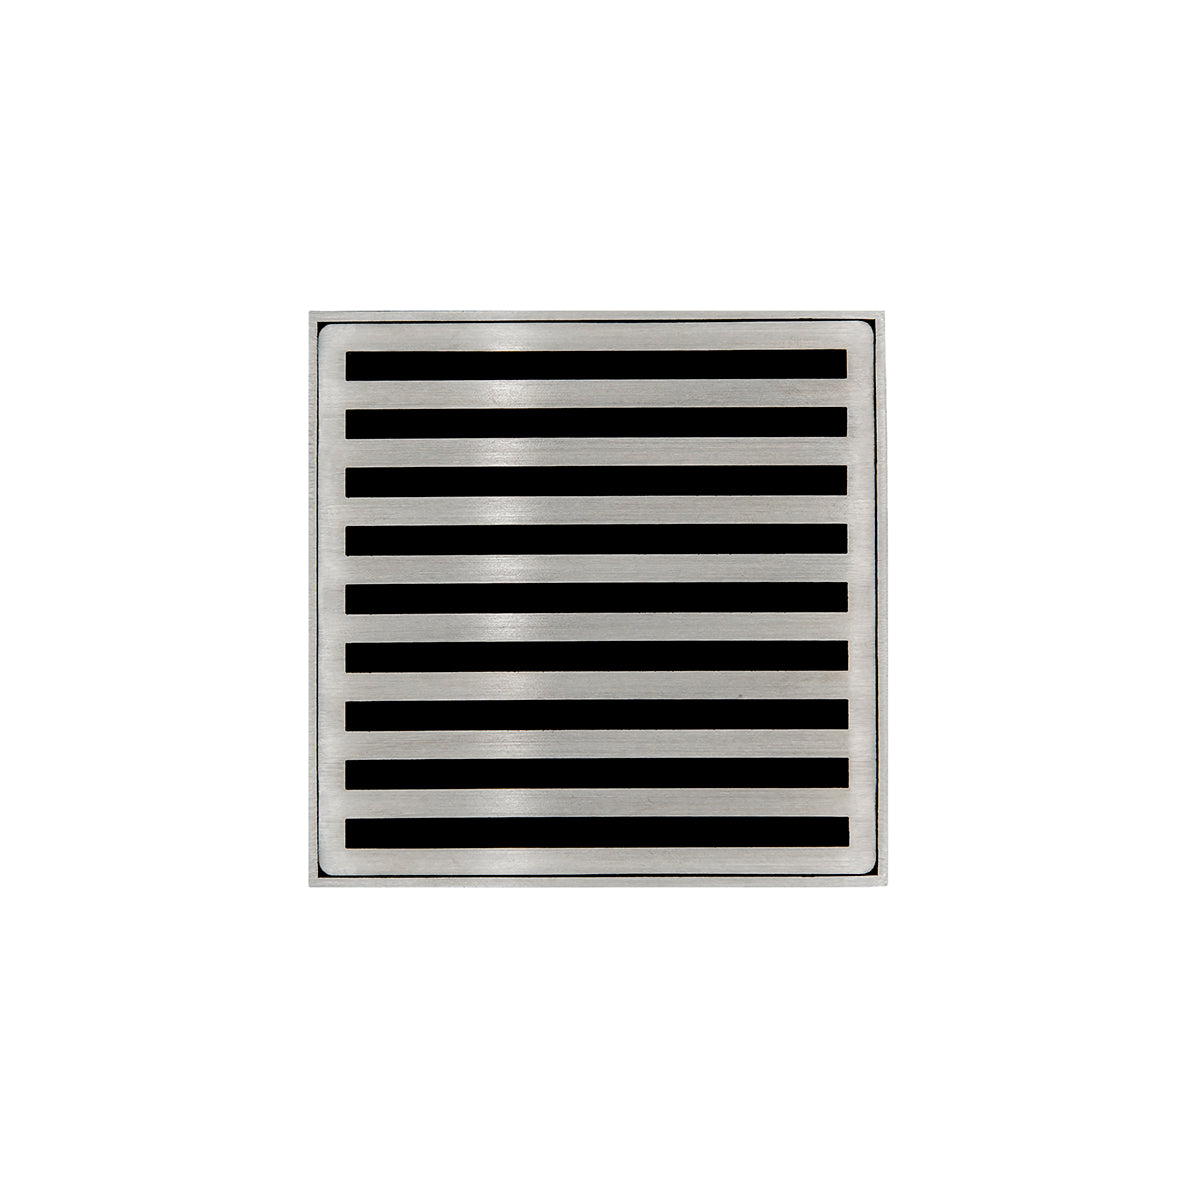 Infinity Drain 4" x 4" ND 4 Premium Center Drain Kit with Lines Pattern Decorative Plate with Cast Iron Drain Body, 2" Outlet